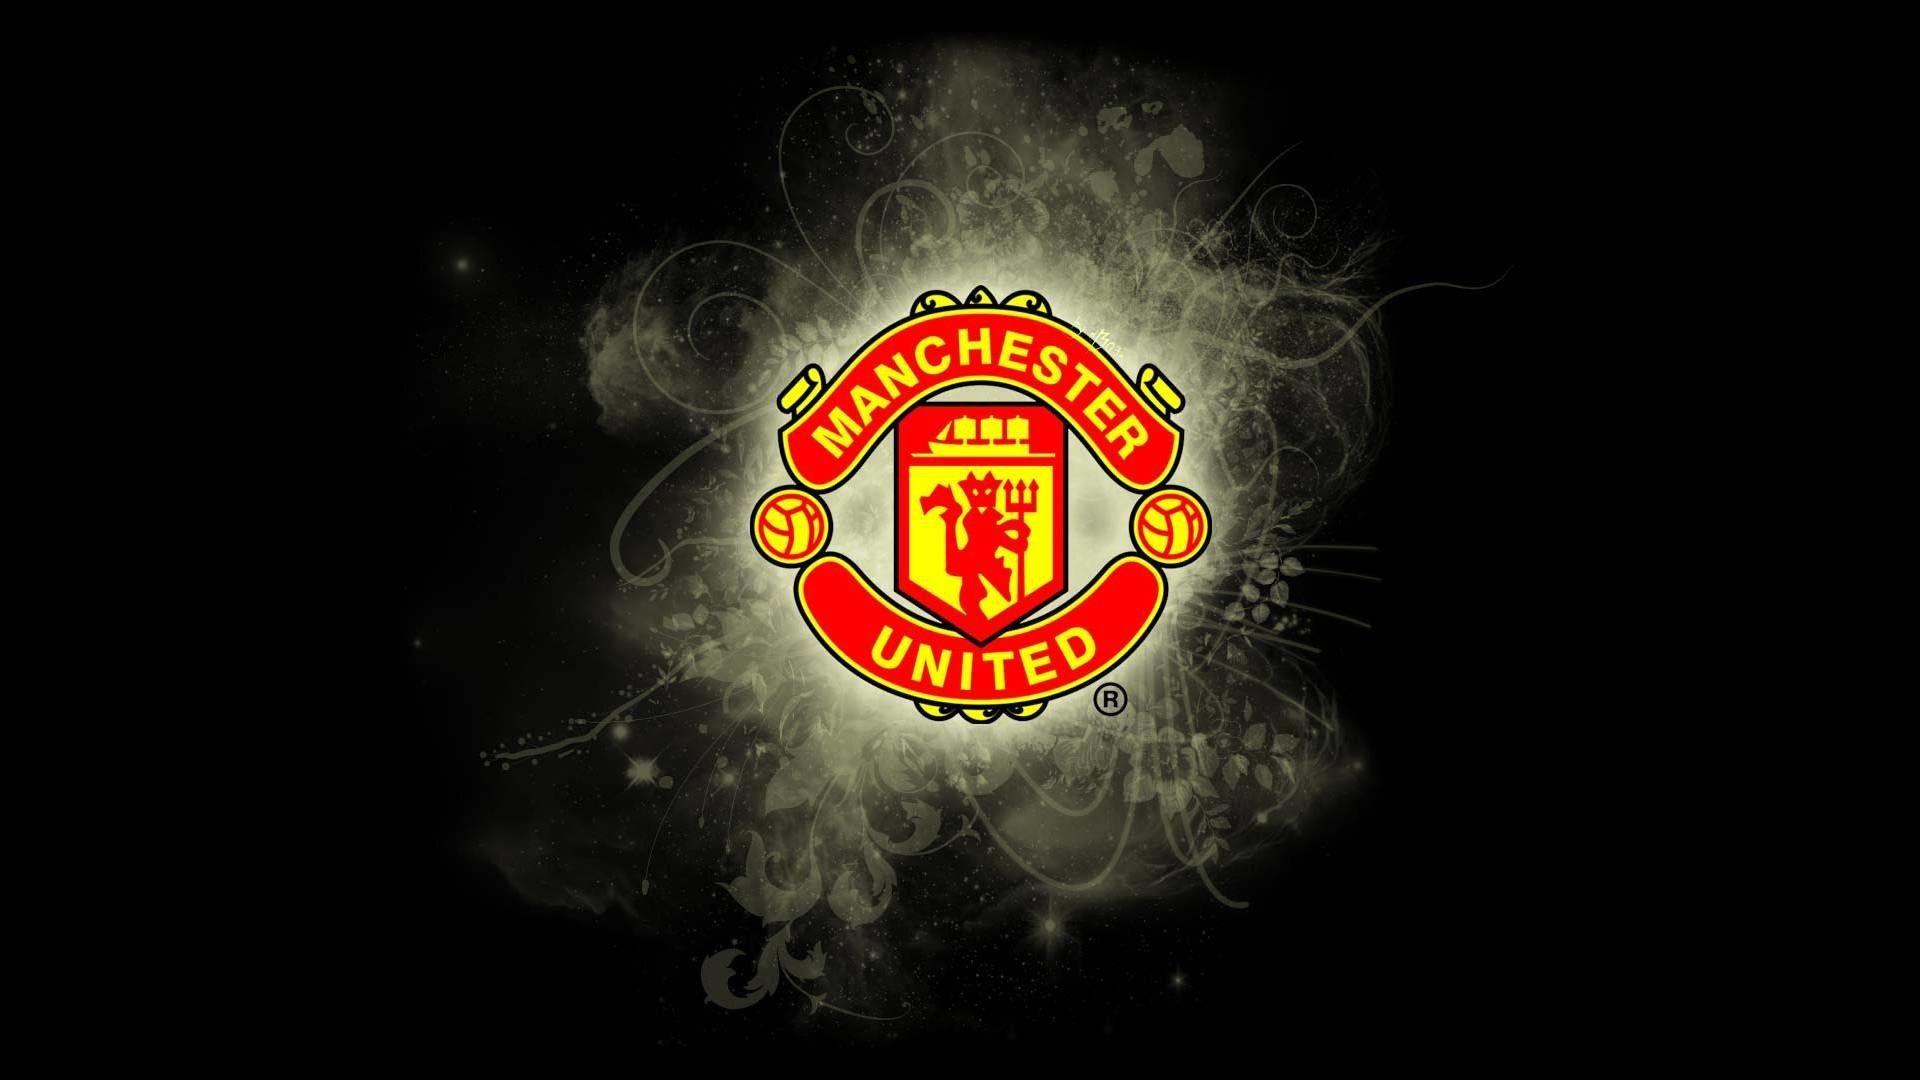 Manchester United Wallpaper 2018 background picture